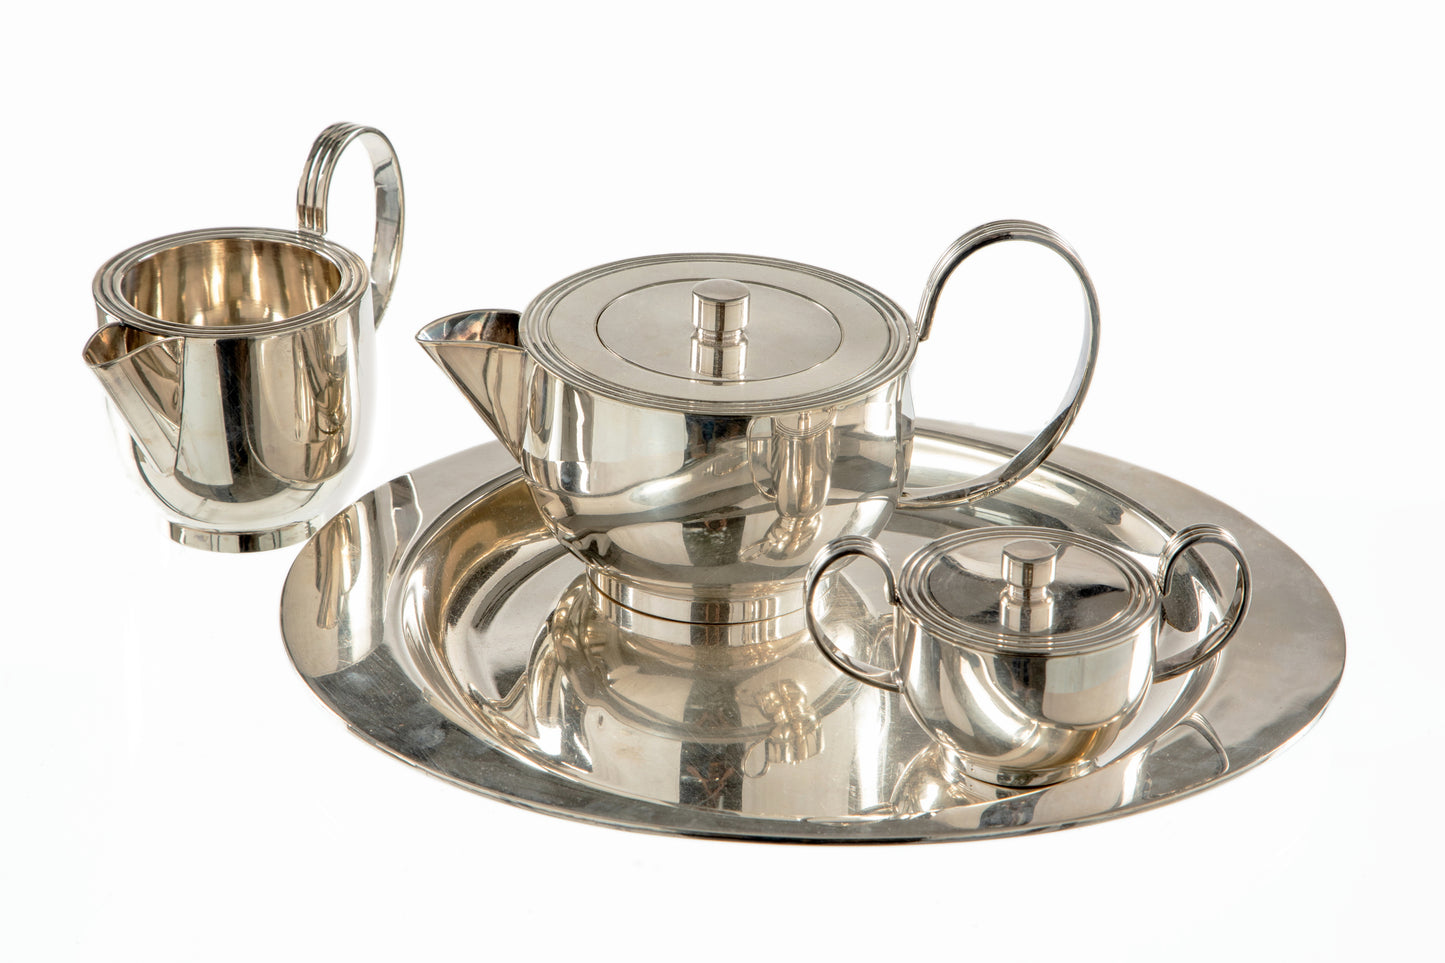 1960s silver plated table set